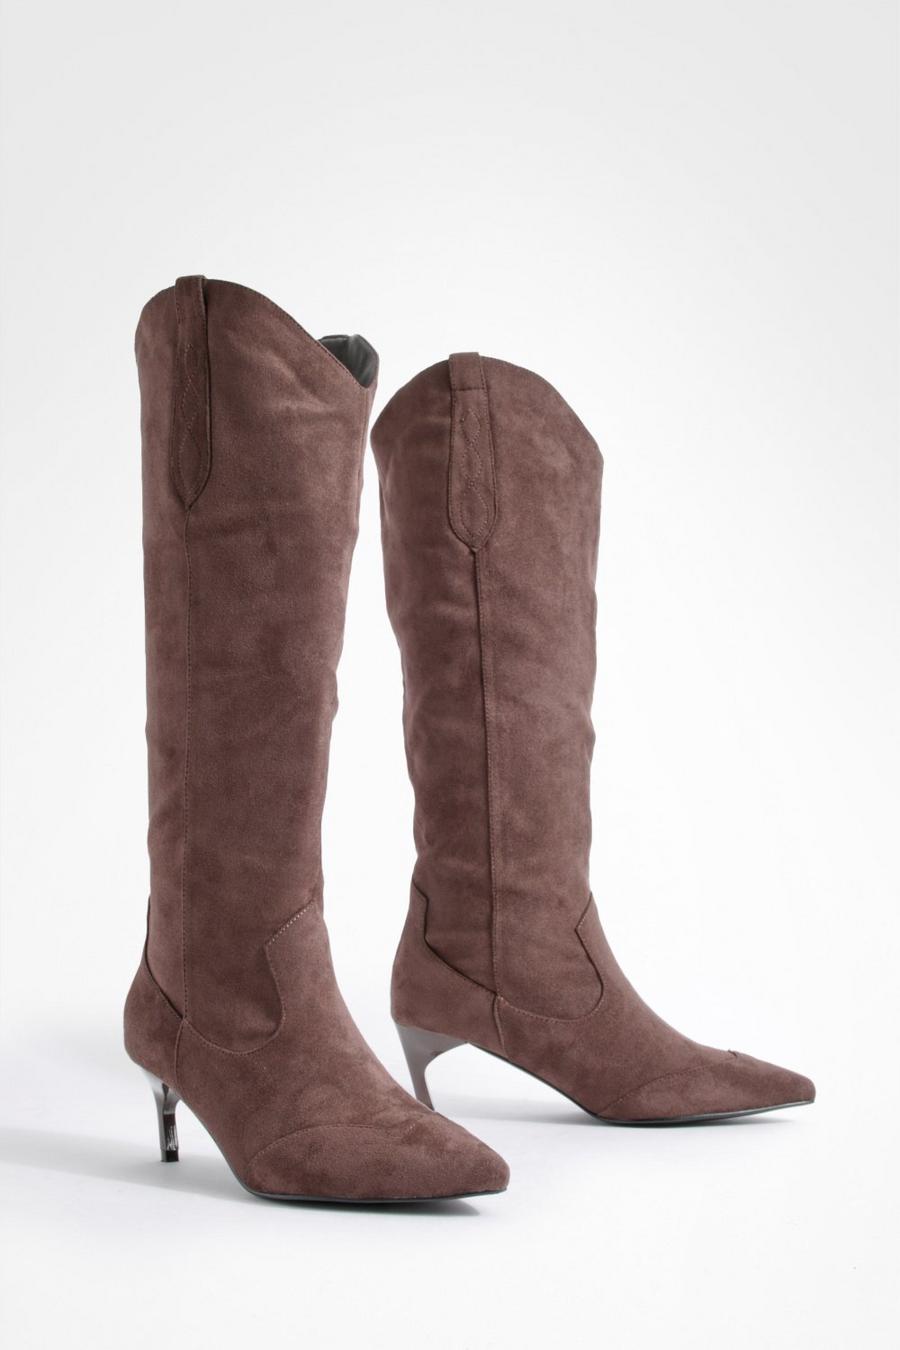 Chocolate Western Detail Low Knee High Boots